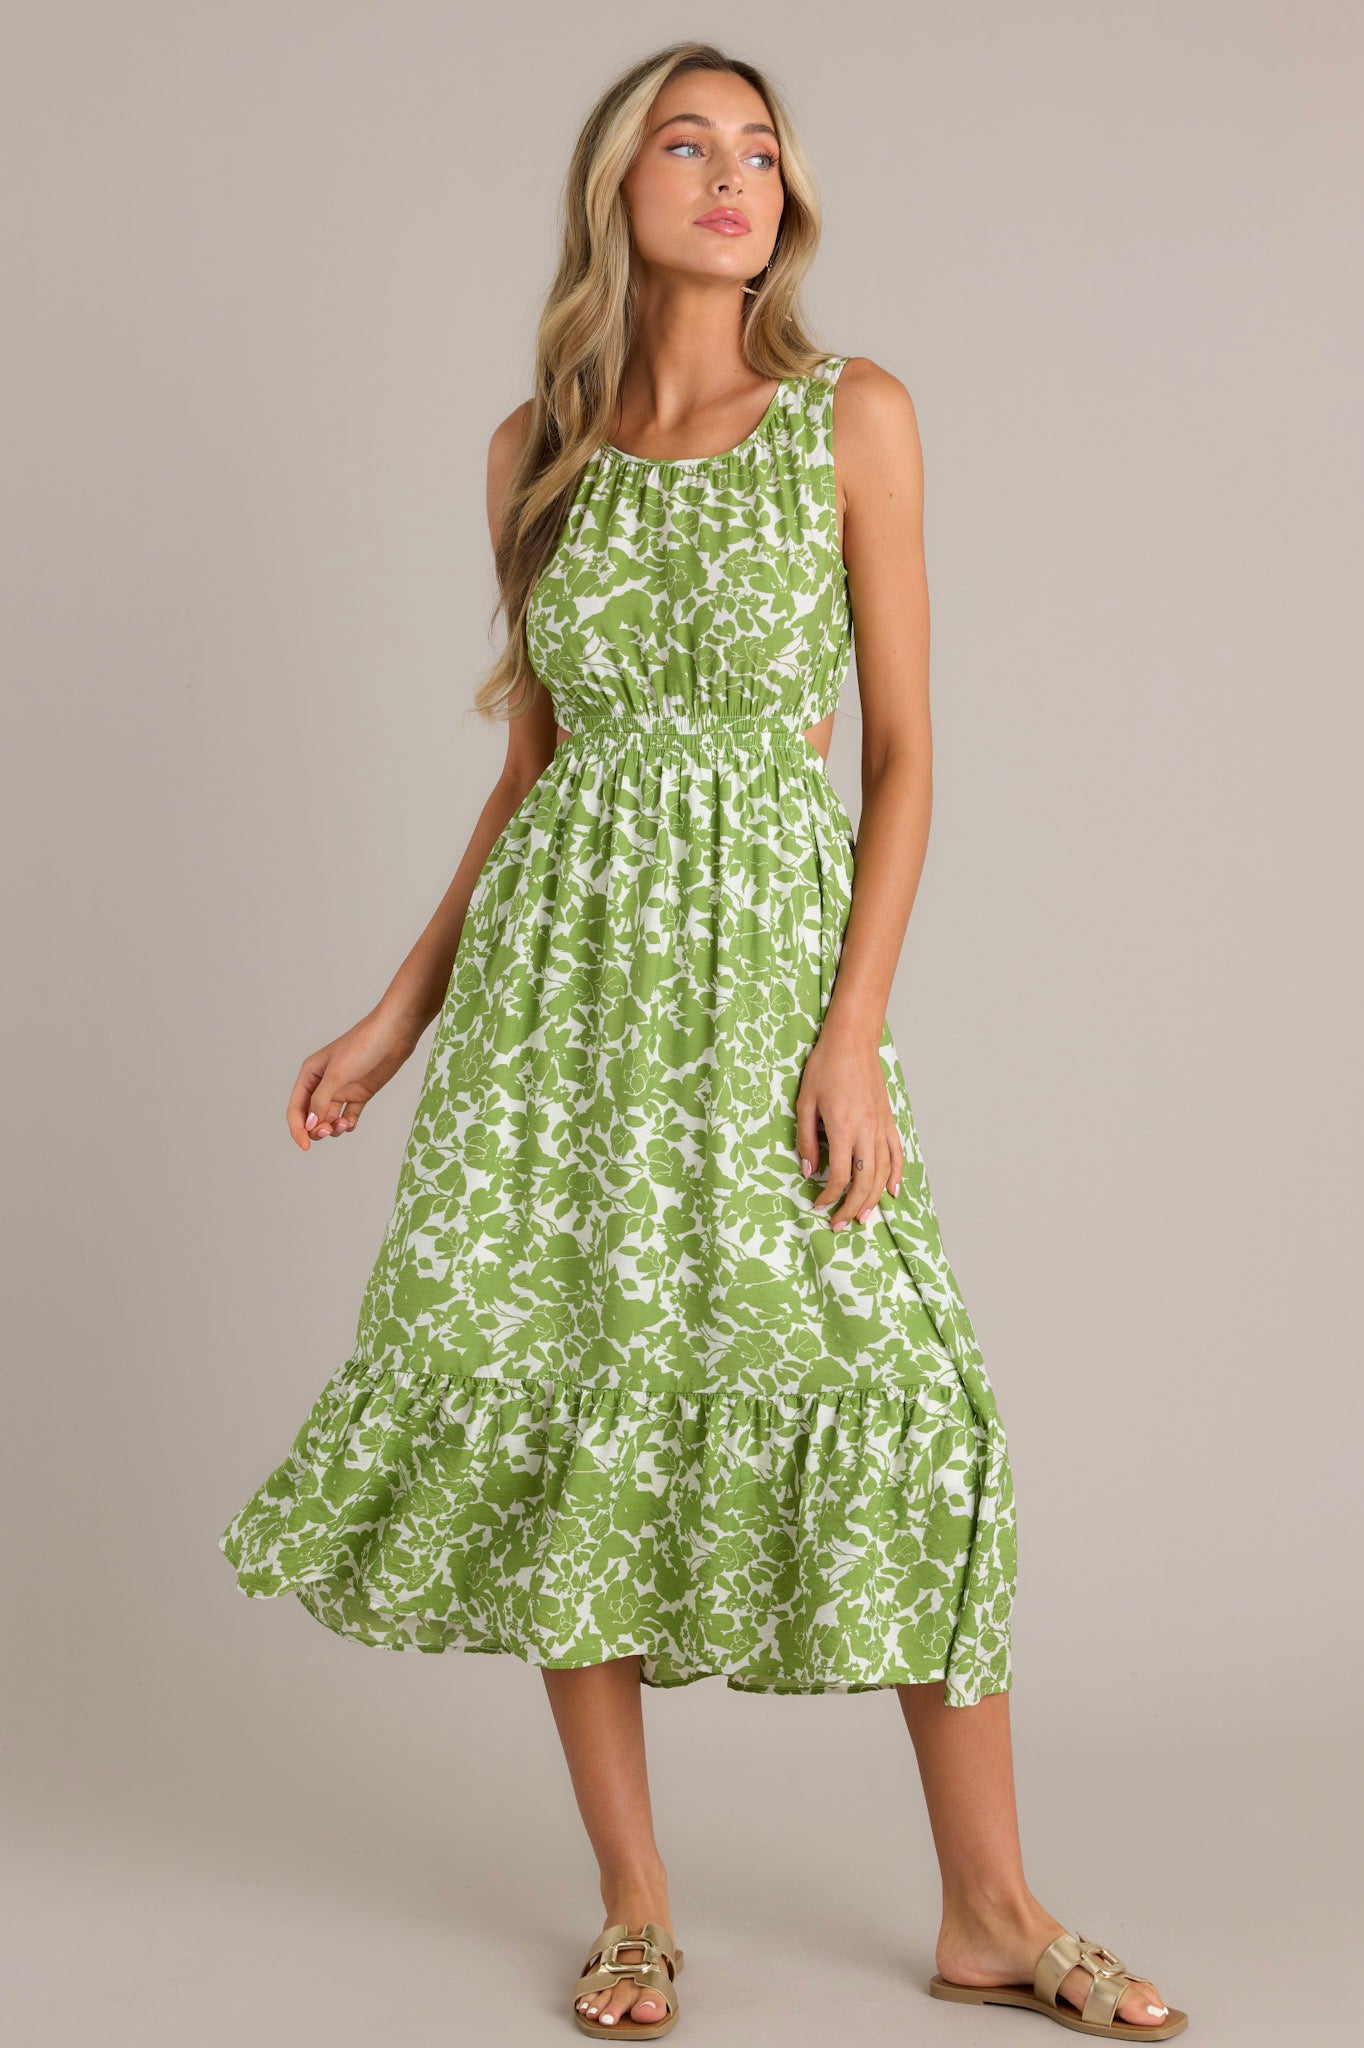 Front angled view of a model wearing a green and white floral print sleeveless dress with side cutouts, a gathered waist, and a tiered skirt, showcasing the dress's flattering fit and design details.